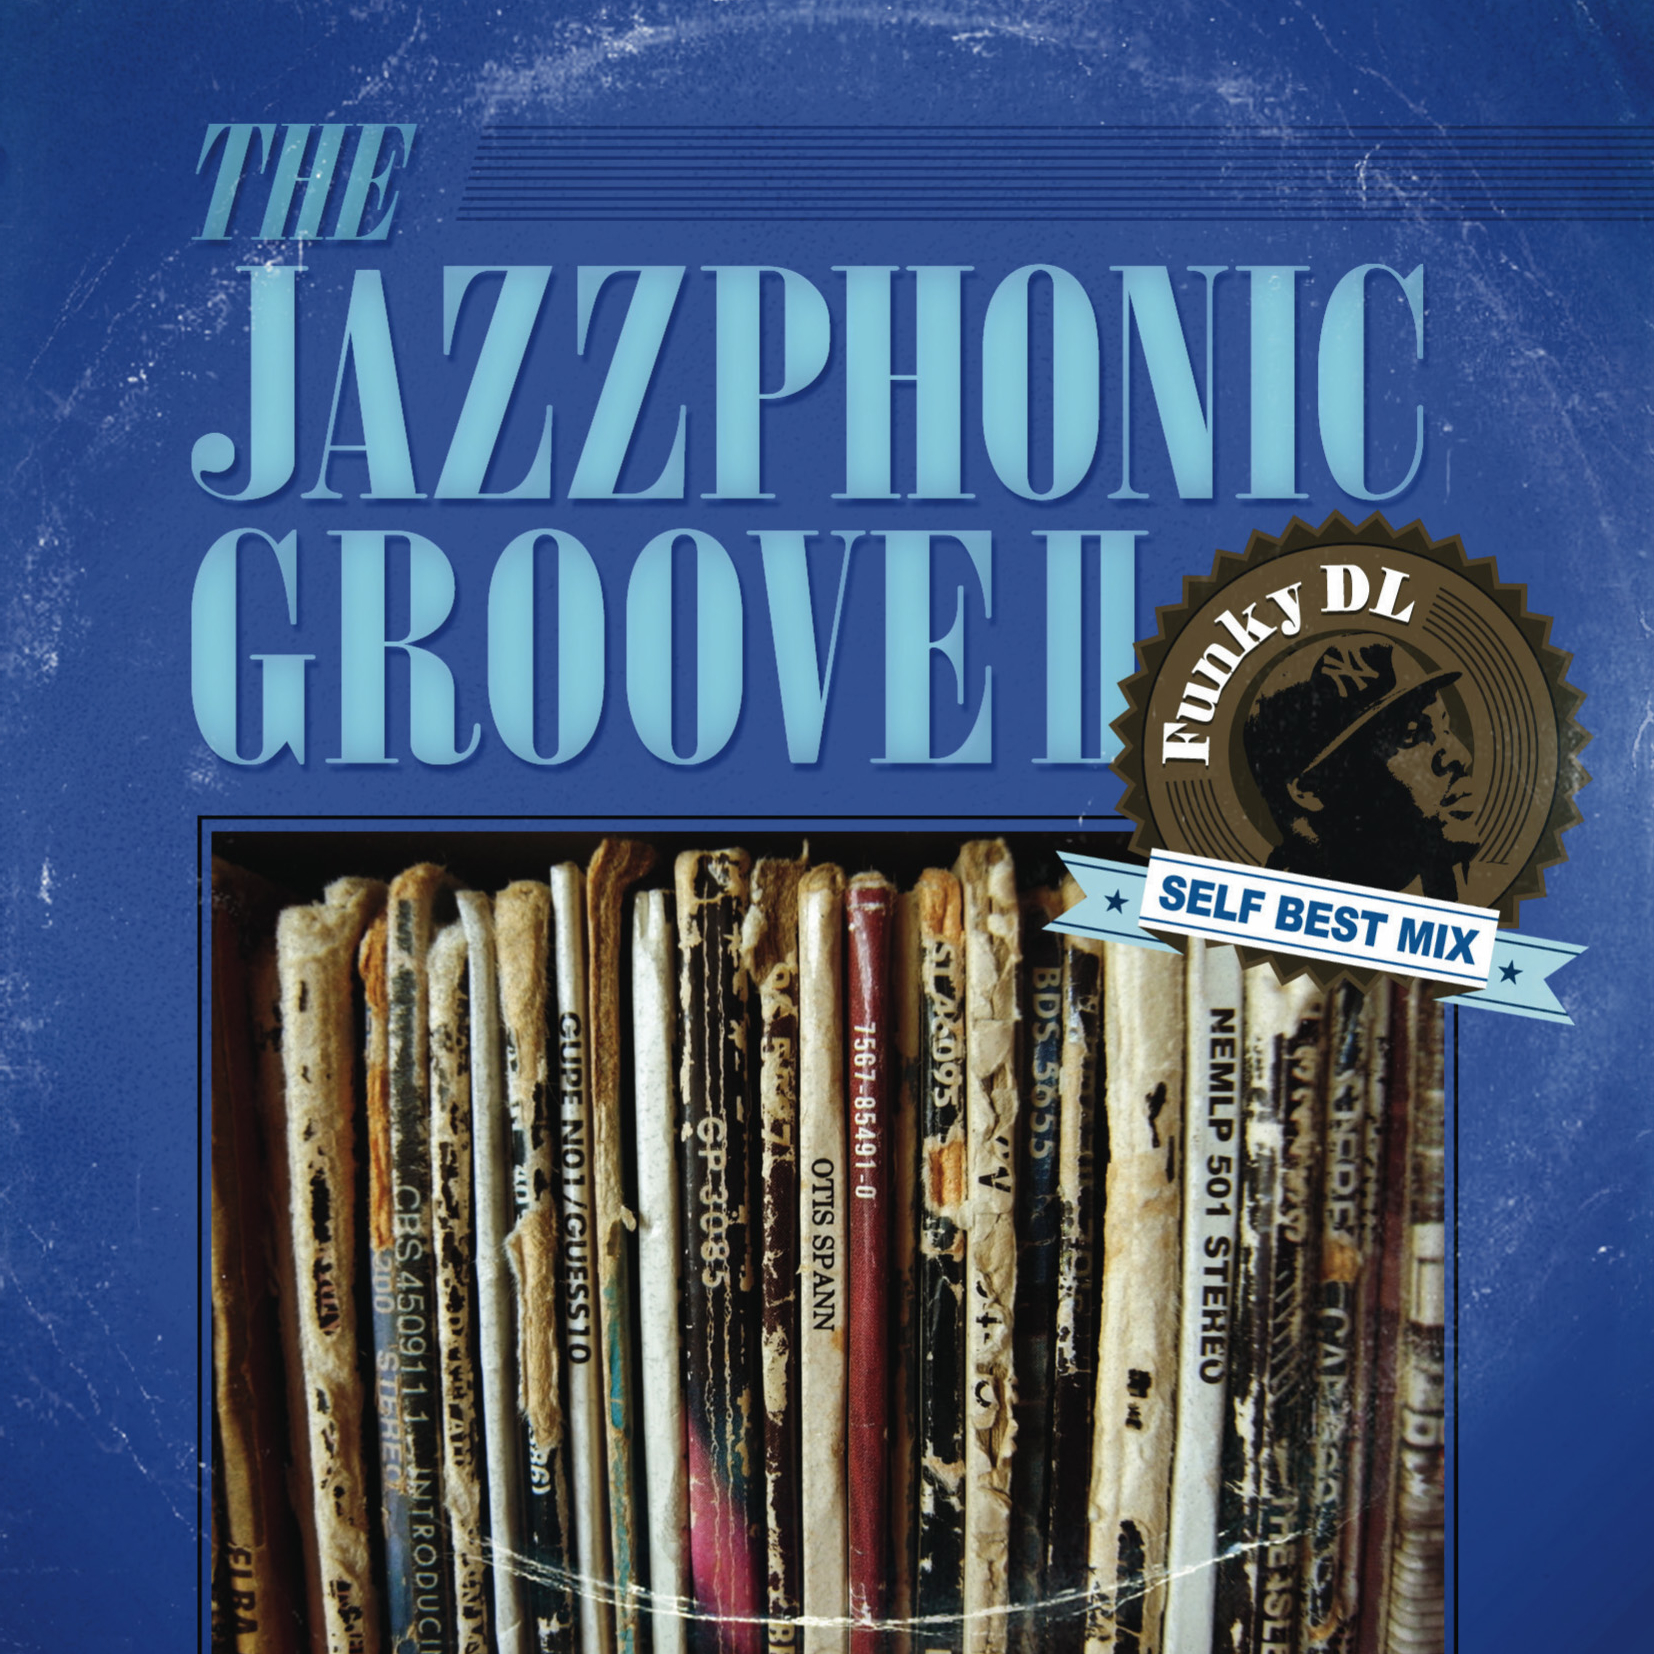 The Jazzphonic Groove 2 ～Funky DL Self Best Mix